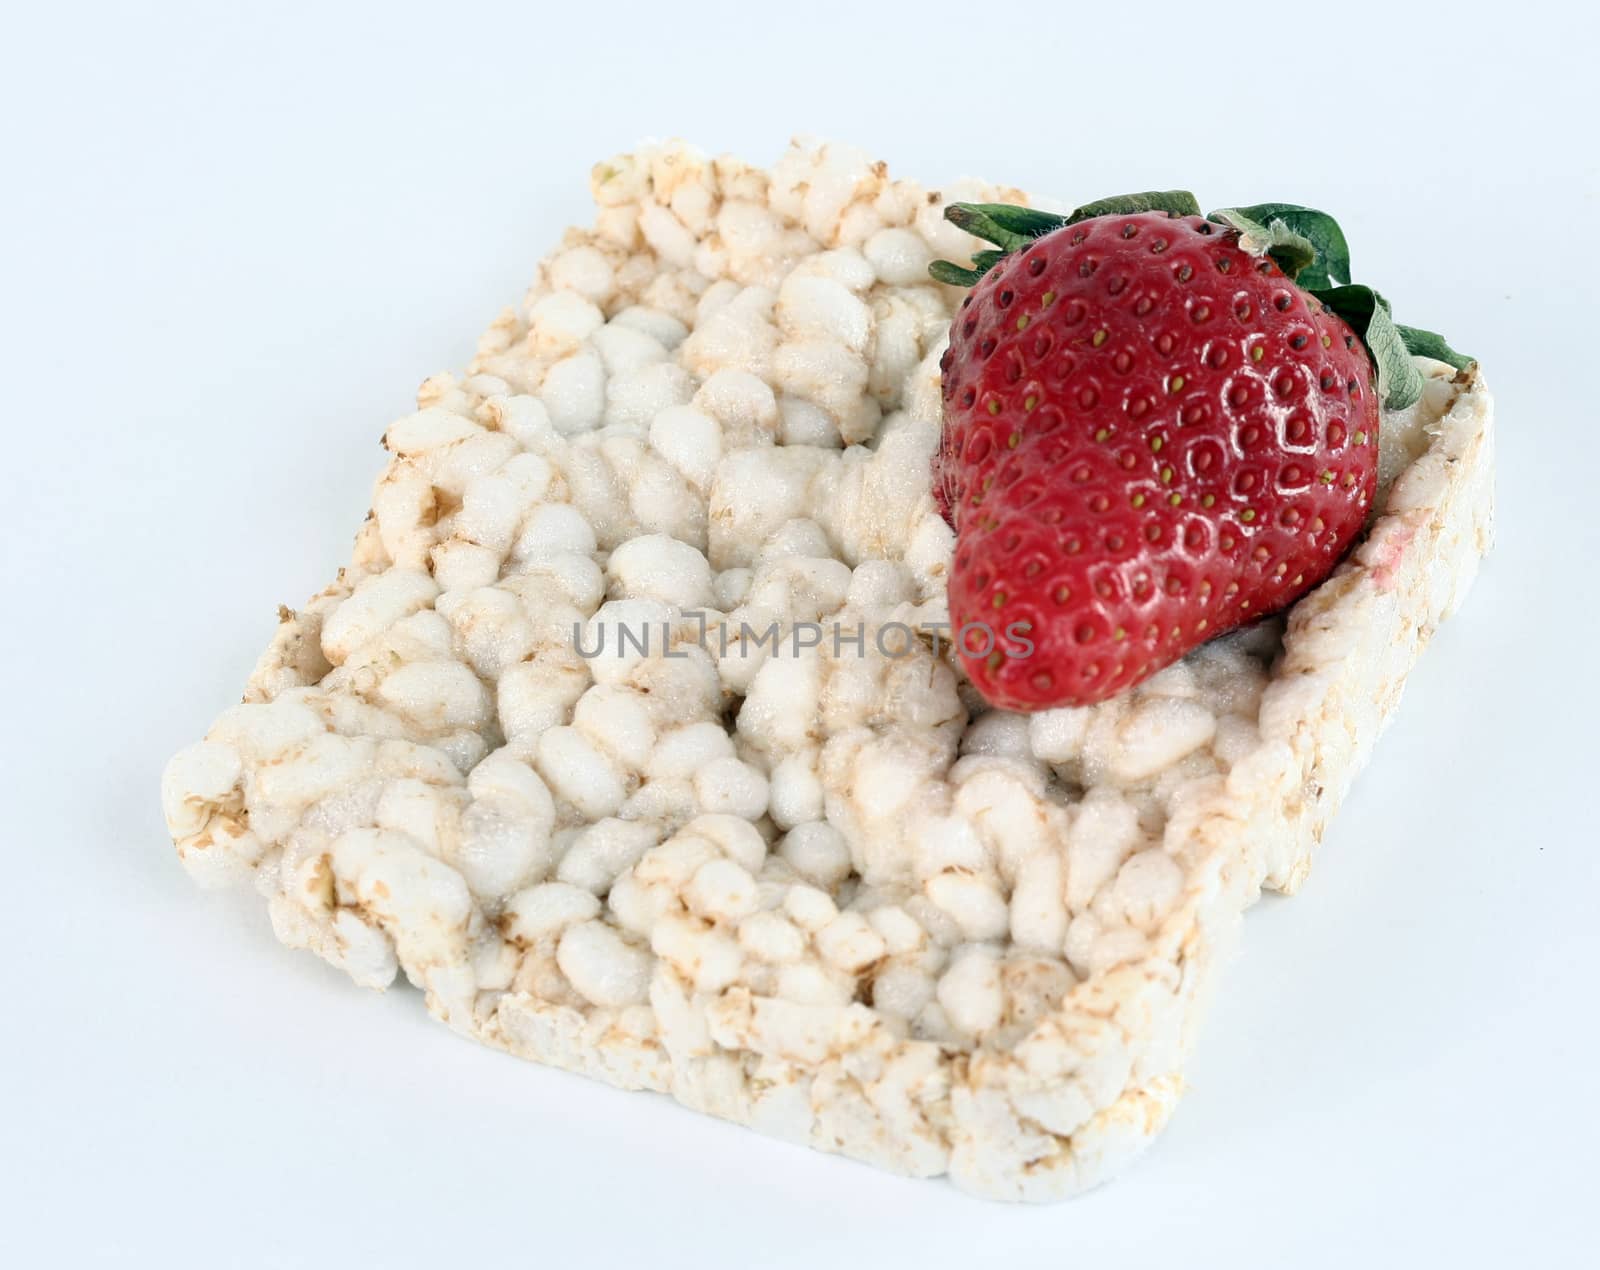 Healthy breakfast with ricebread and strawberry.